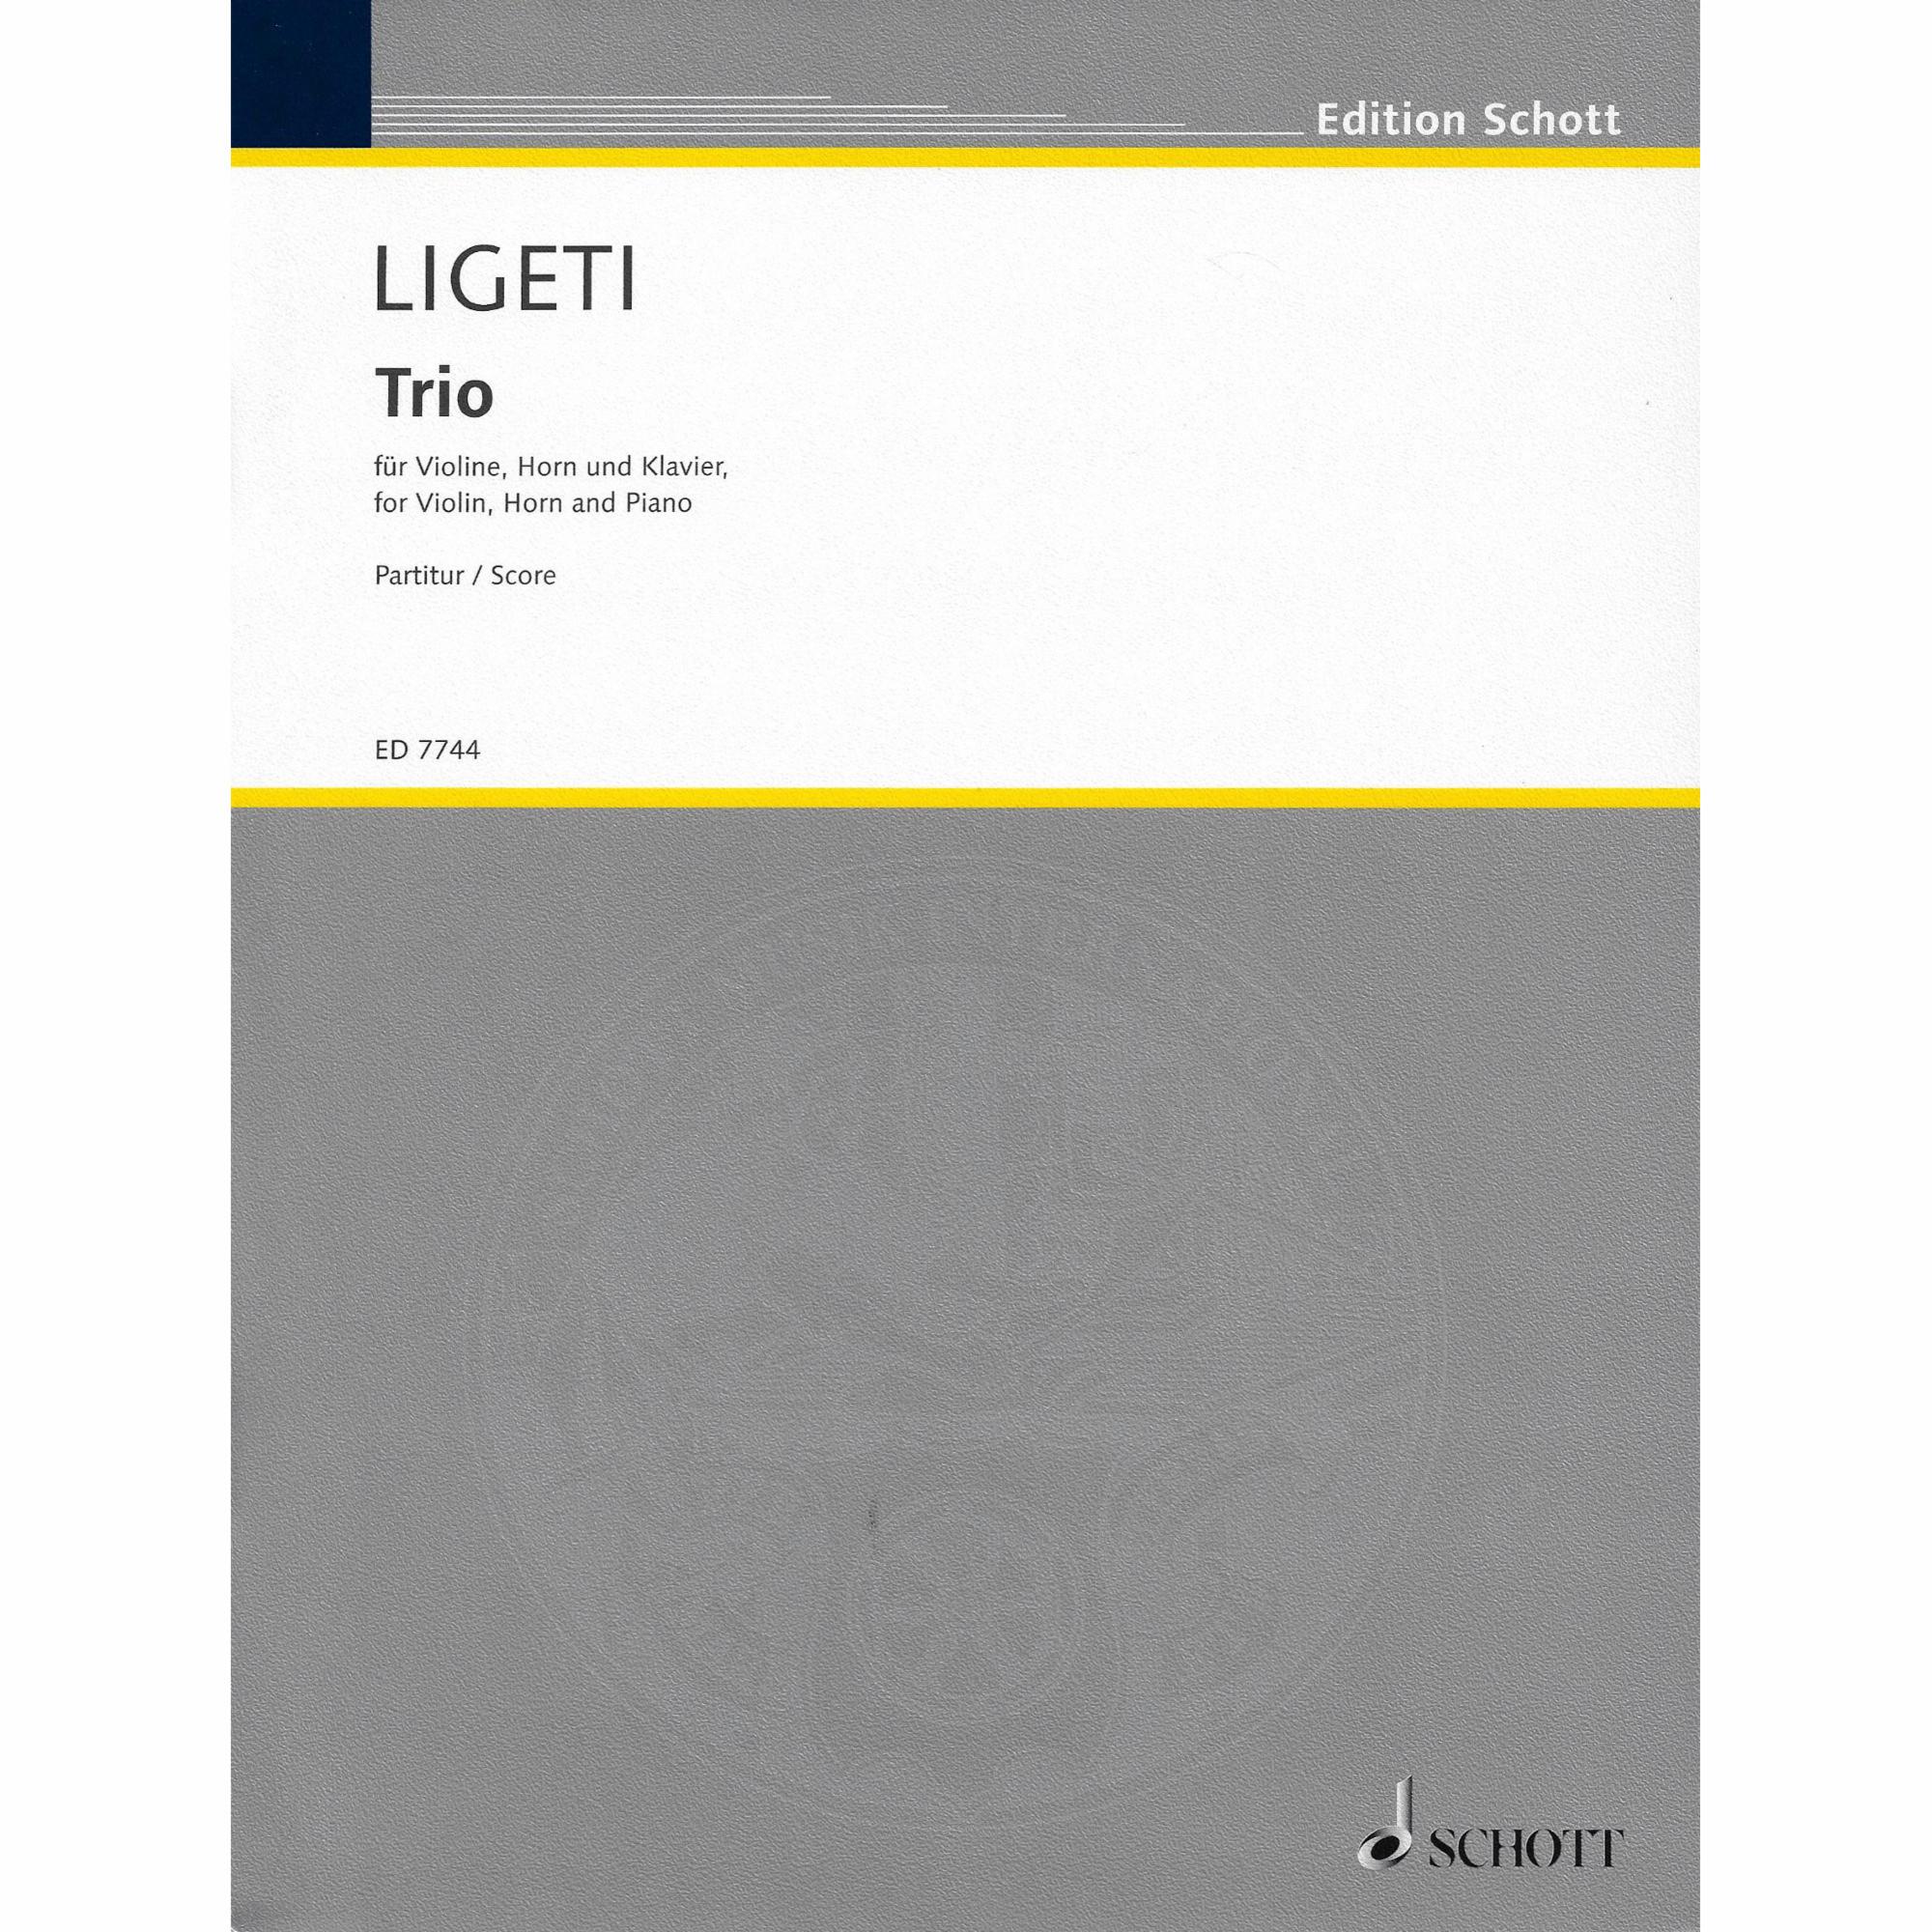 Ligeti -- Trio for Violin, Horn, and Piano